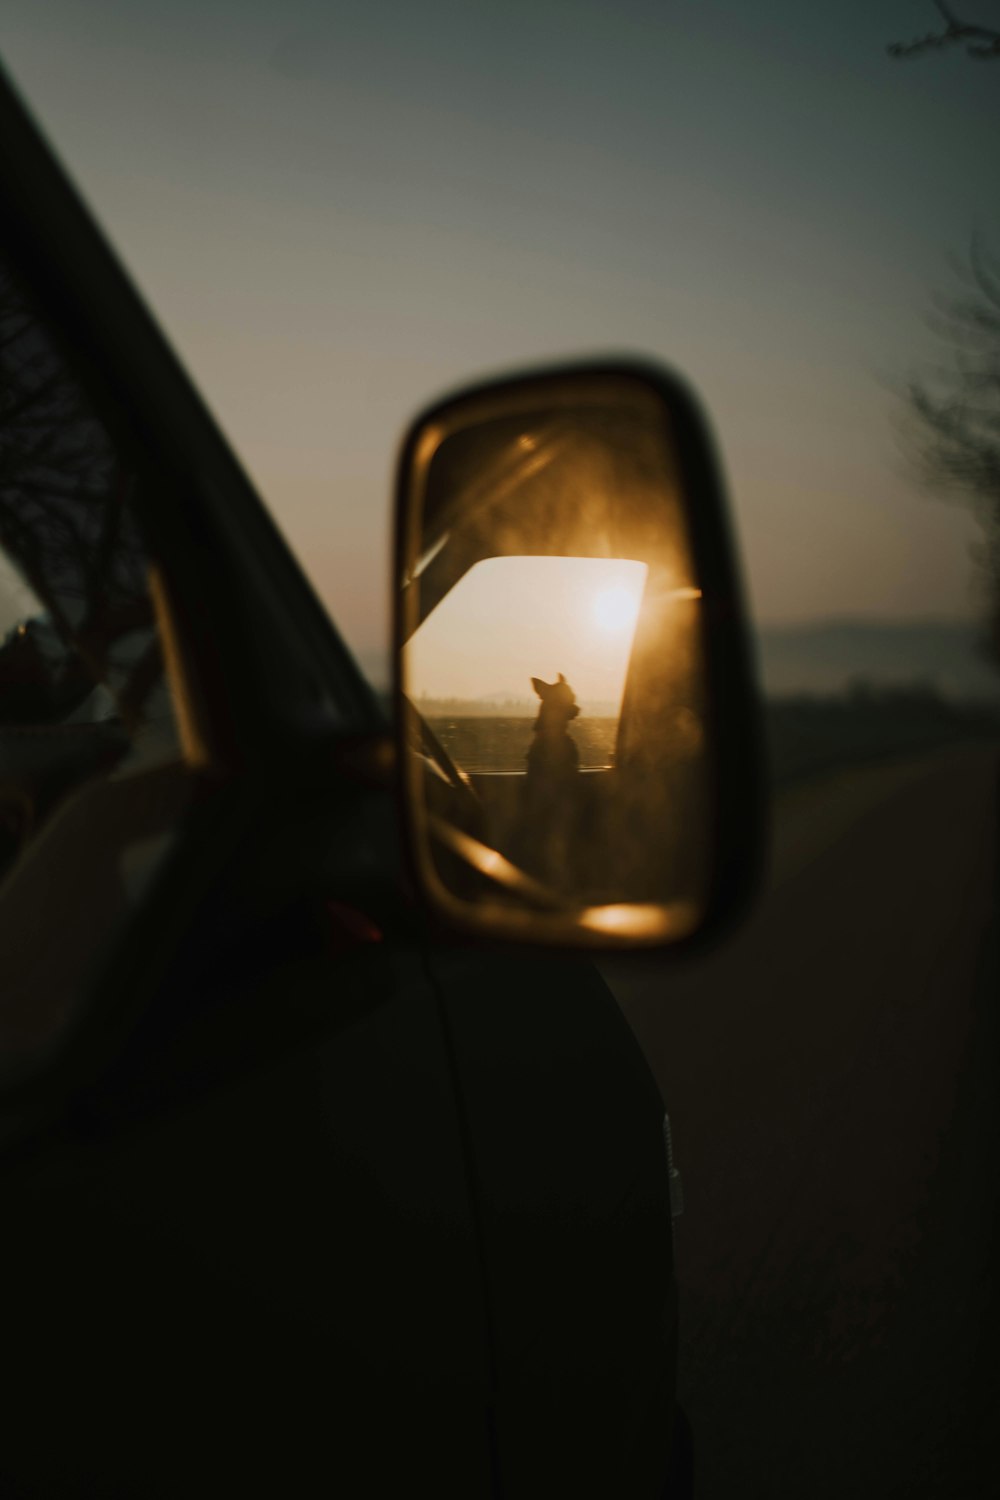 a rear view mirror with a dog in the reflection